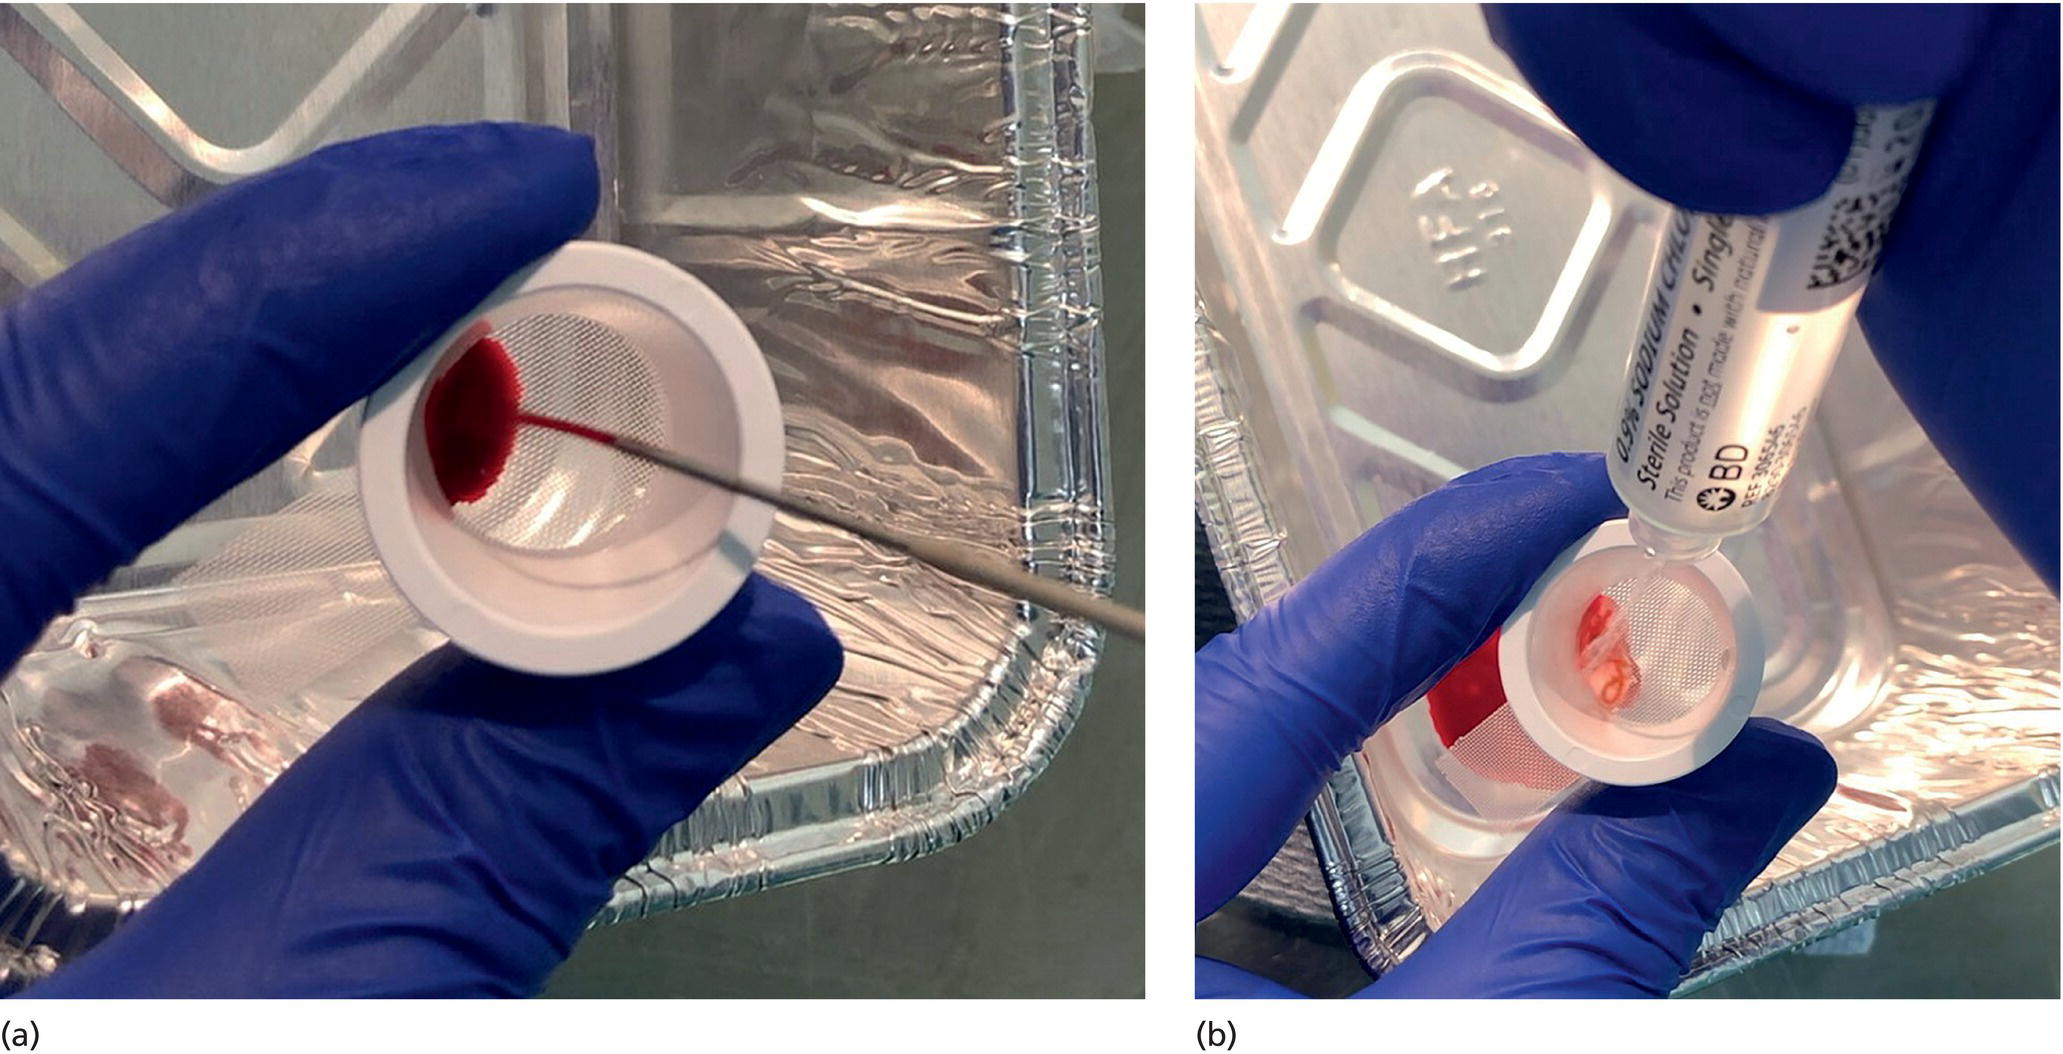 Photos depict (a) Use of tissue sieve to collect specimen from biopsy needle. (b) Core sample is washed with saline to remove blood.